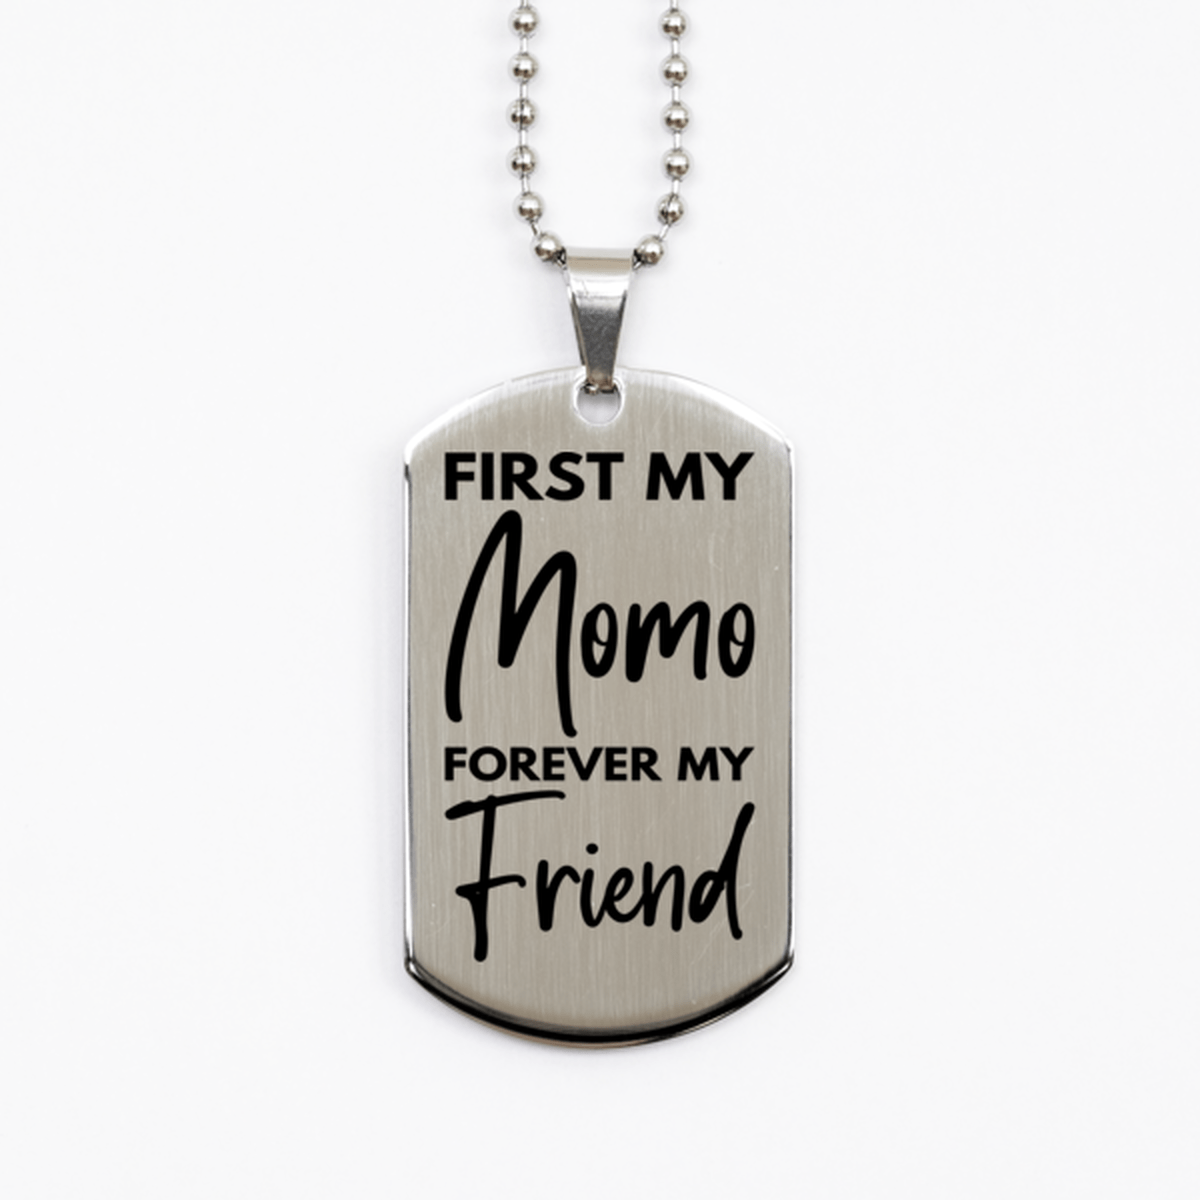 Inspirational Momo Silver Dog Tag Necklace, First My Momo Forever My Friend, Best Birthday Gifts for Momo